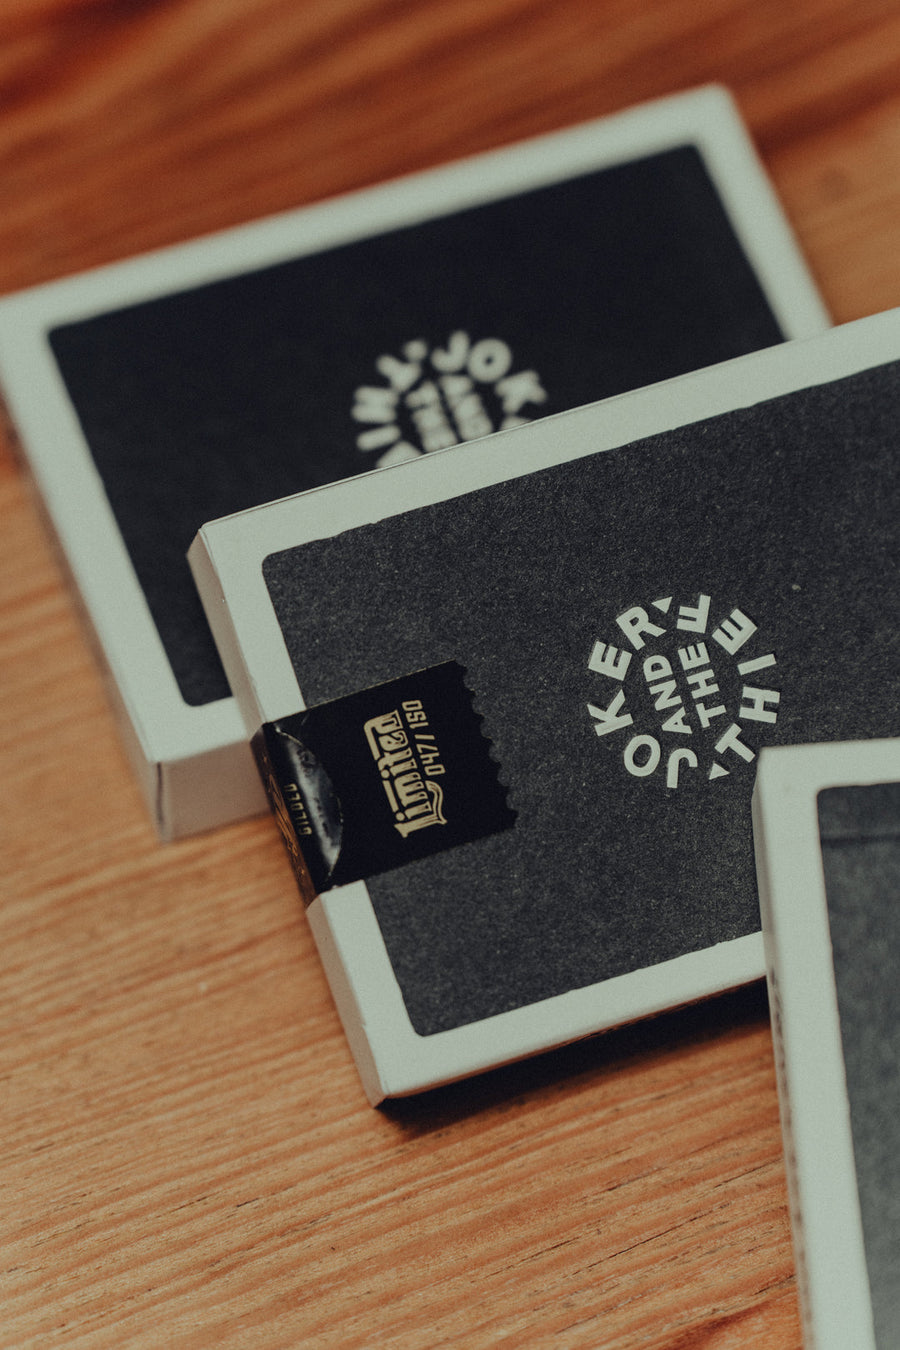 GILDED 597 Playing Cards (Black) by Joker & The Thief (Edition of 150)